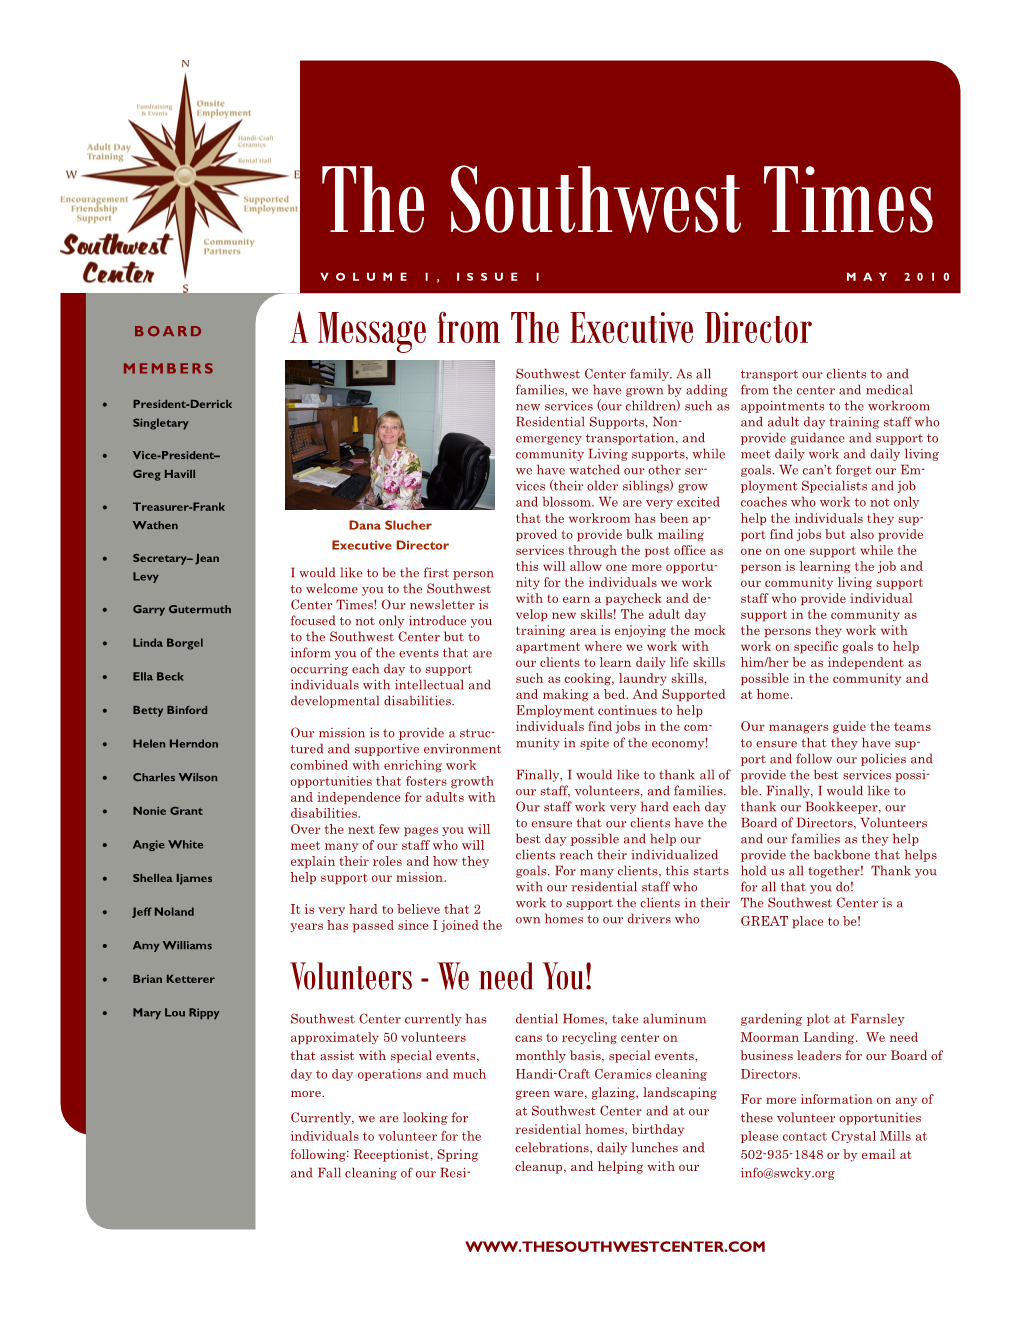 The Southwest Times